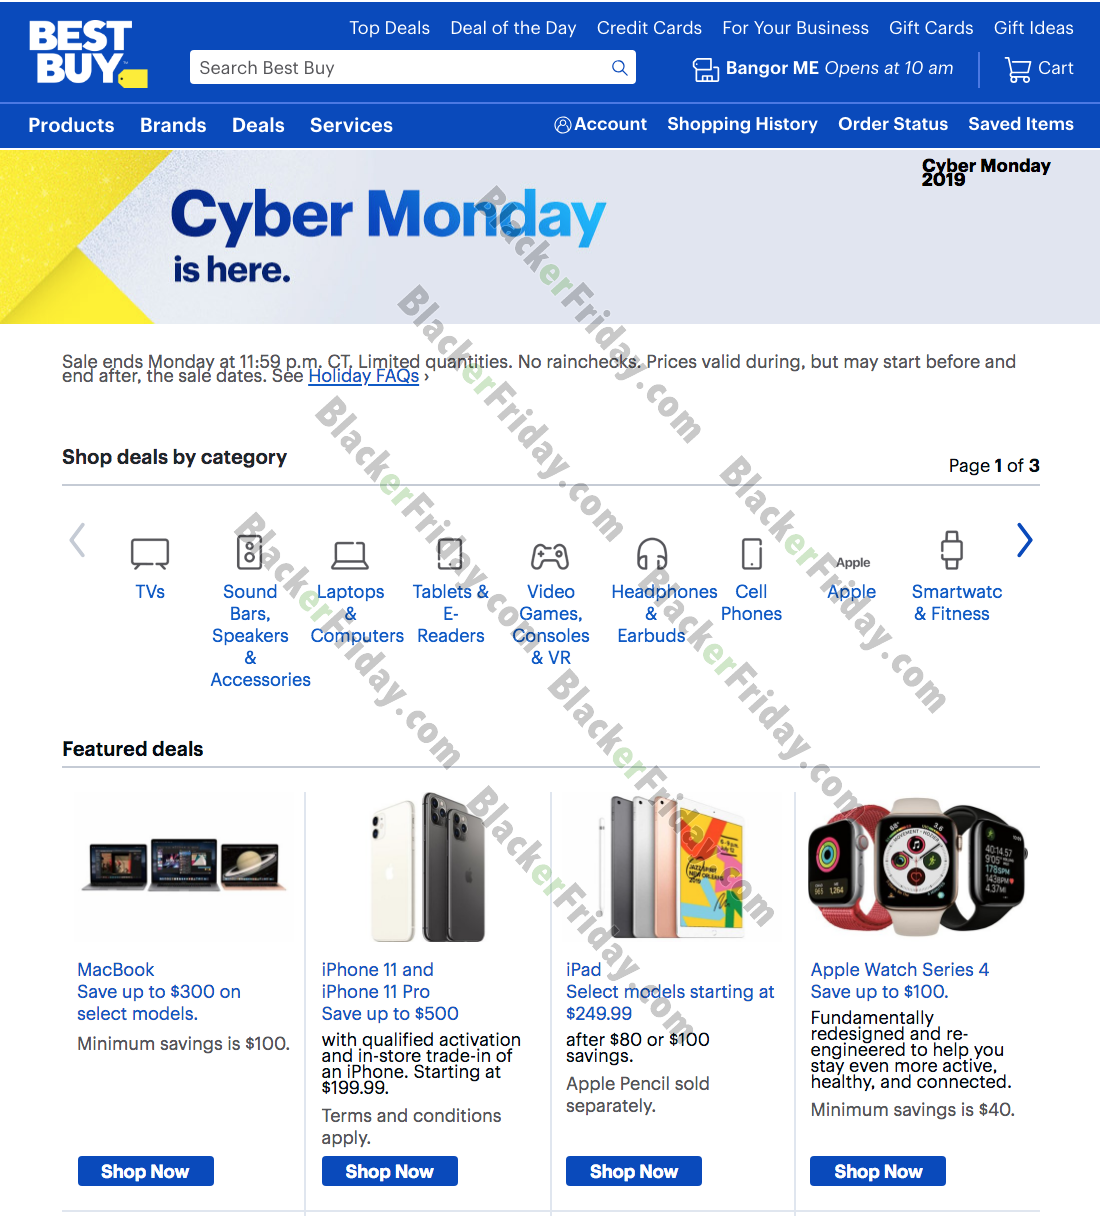 Best Buy Cyber Monday 2020 Sale - What to Expect - Blacker Friday